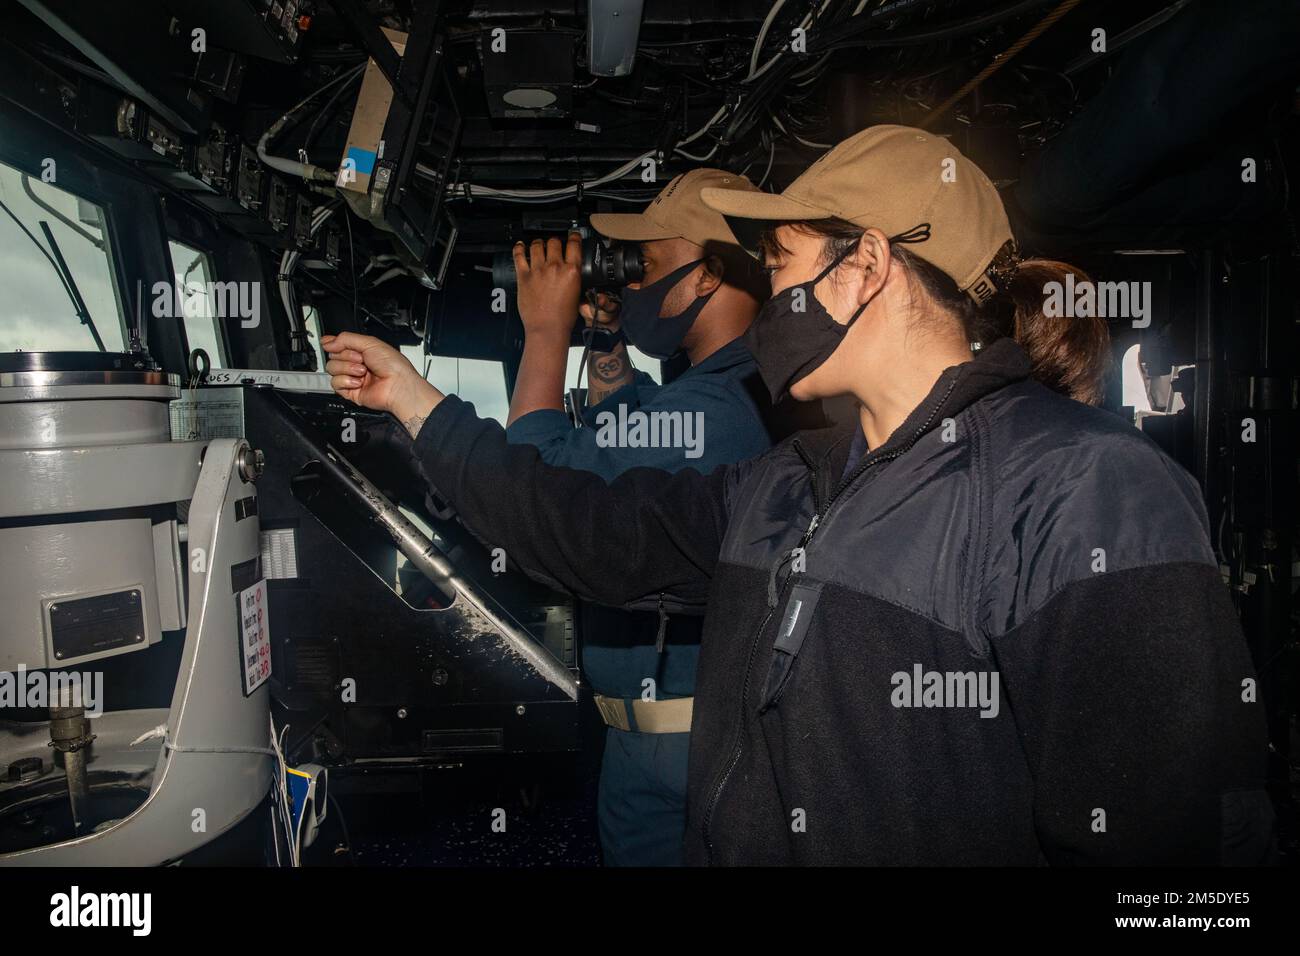 PHILIPPINE SEA (March 5, 2022) Lt.j.g. Valerie Doan (right), from Walnut Creek, Calif., and Ensign Treyvon Darby, from Norfolk, Va., search for surface contacts while standing watch on the bridge aboard Arleigh Burke-class guided-missile destroyer USS Ralph Johnson (DDG 114). Ralph Johnson is assigned to Task Force 71/Destroyer Squadron (DESRON) 15, the Navy’s largest forward-deployed DESRON and the U.S. 7th fleet’s principal surface force. Stock Photo